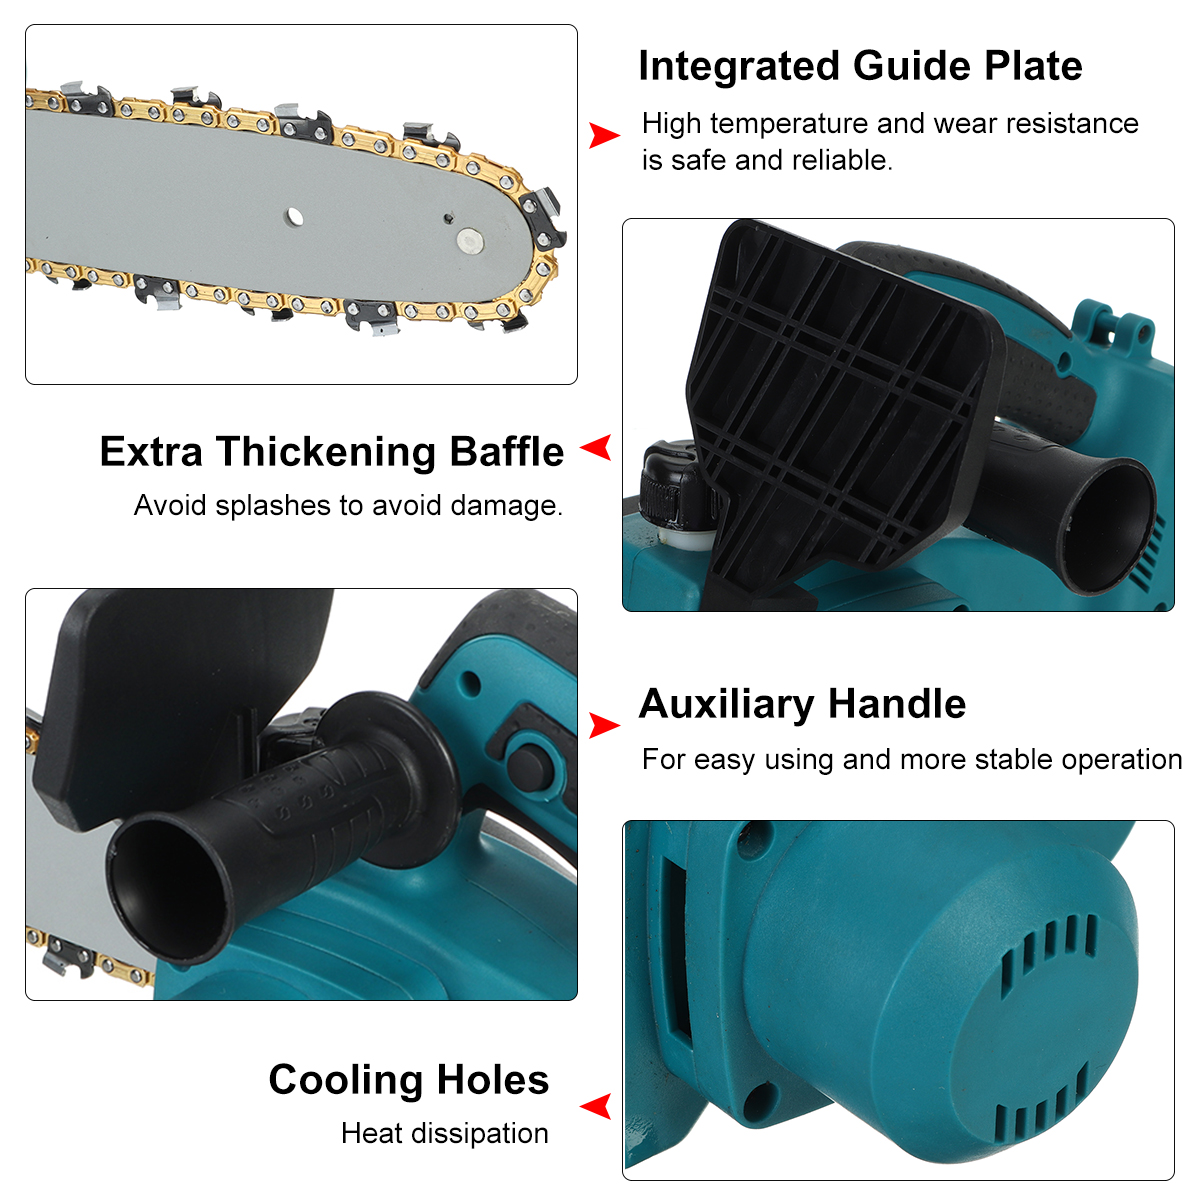 10-Inch-2000W-Brushless-Electric-Saw-Chainsaw-Garden-Woodworking-Wood-Cutters-Fit-Makita-18V-Battery-1890013-8